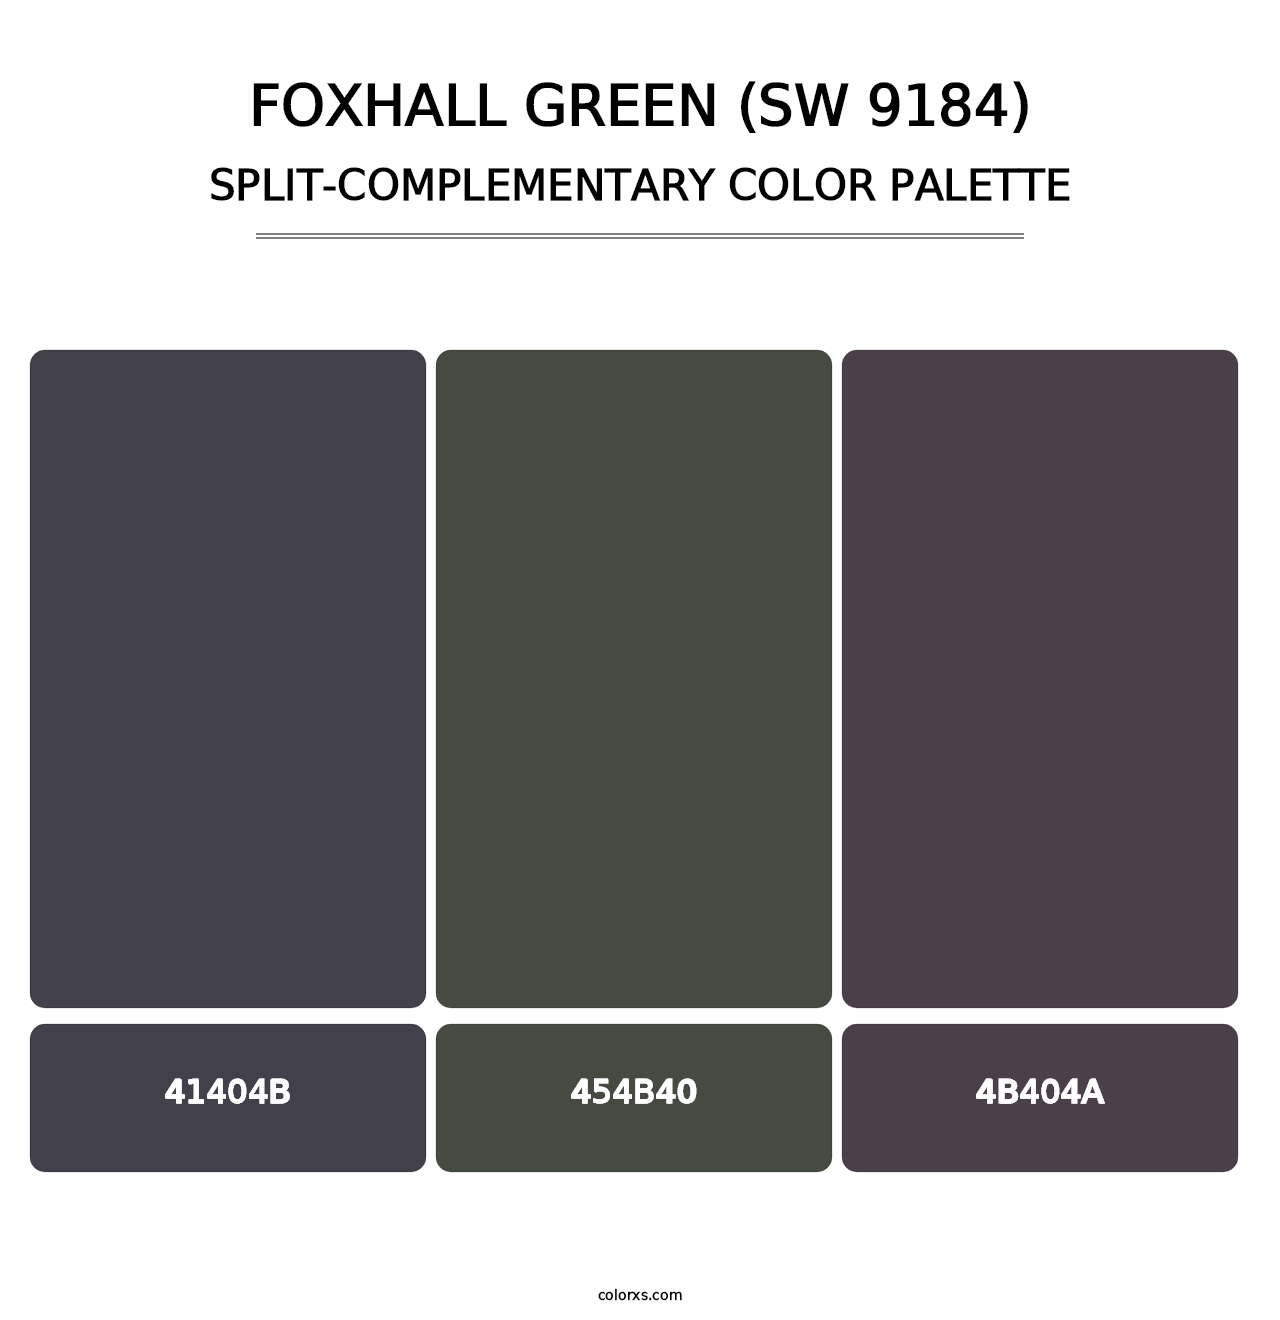 Foxhall Green (SW 9184) - Split-Complementary Color Palette